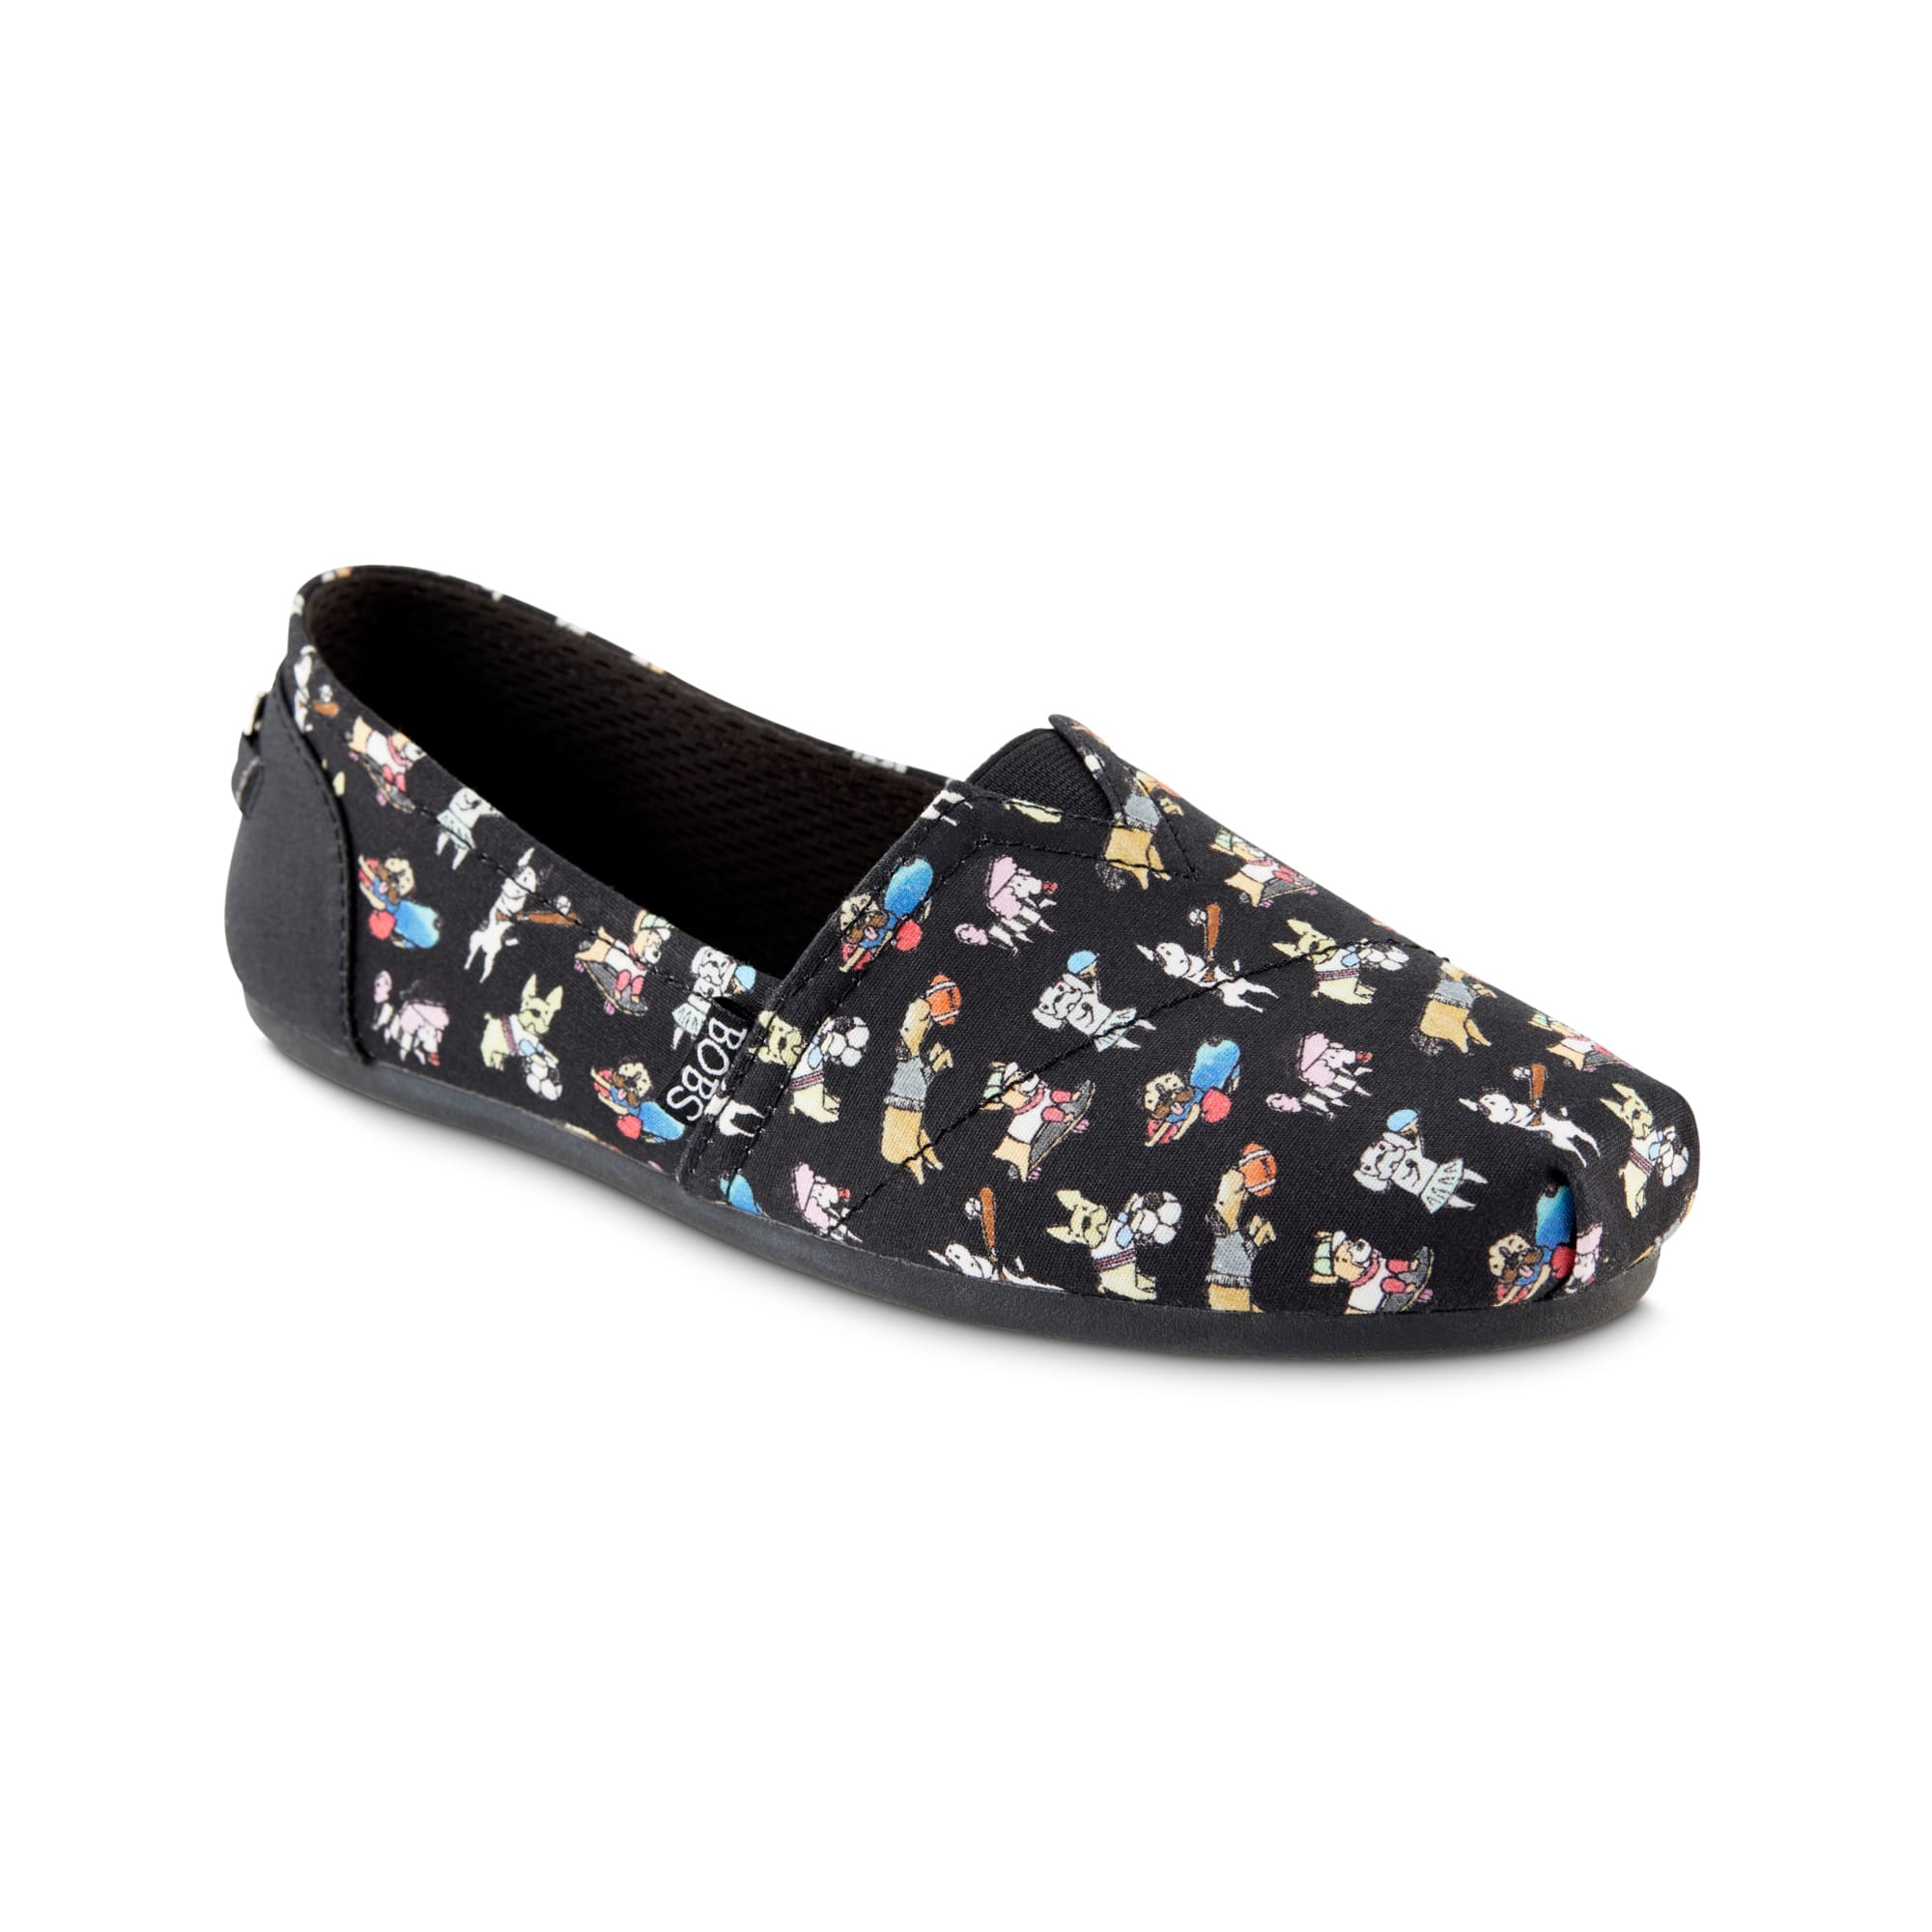 bobs shoes with dogs on them off 75 